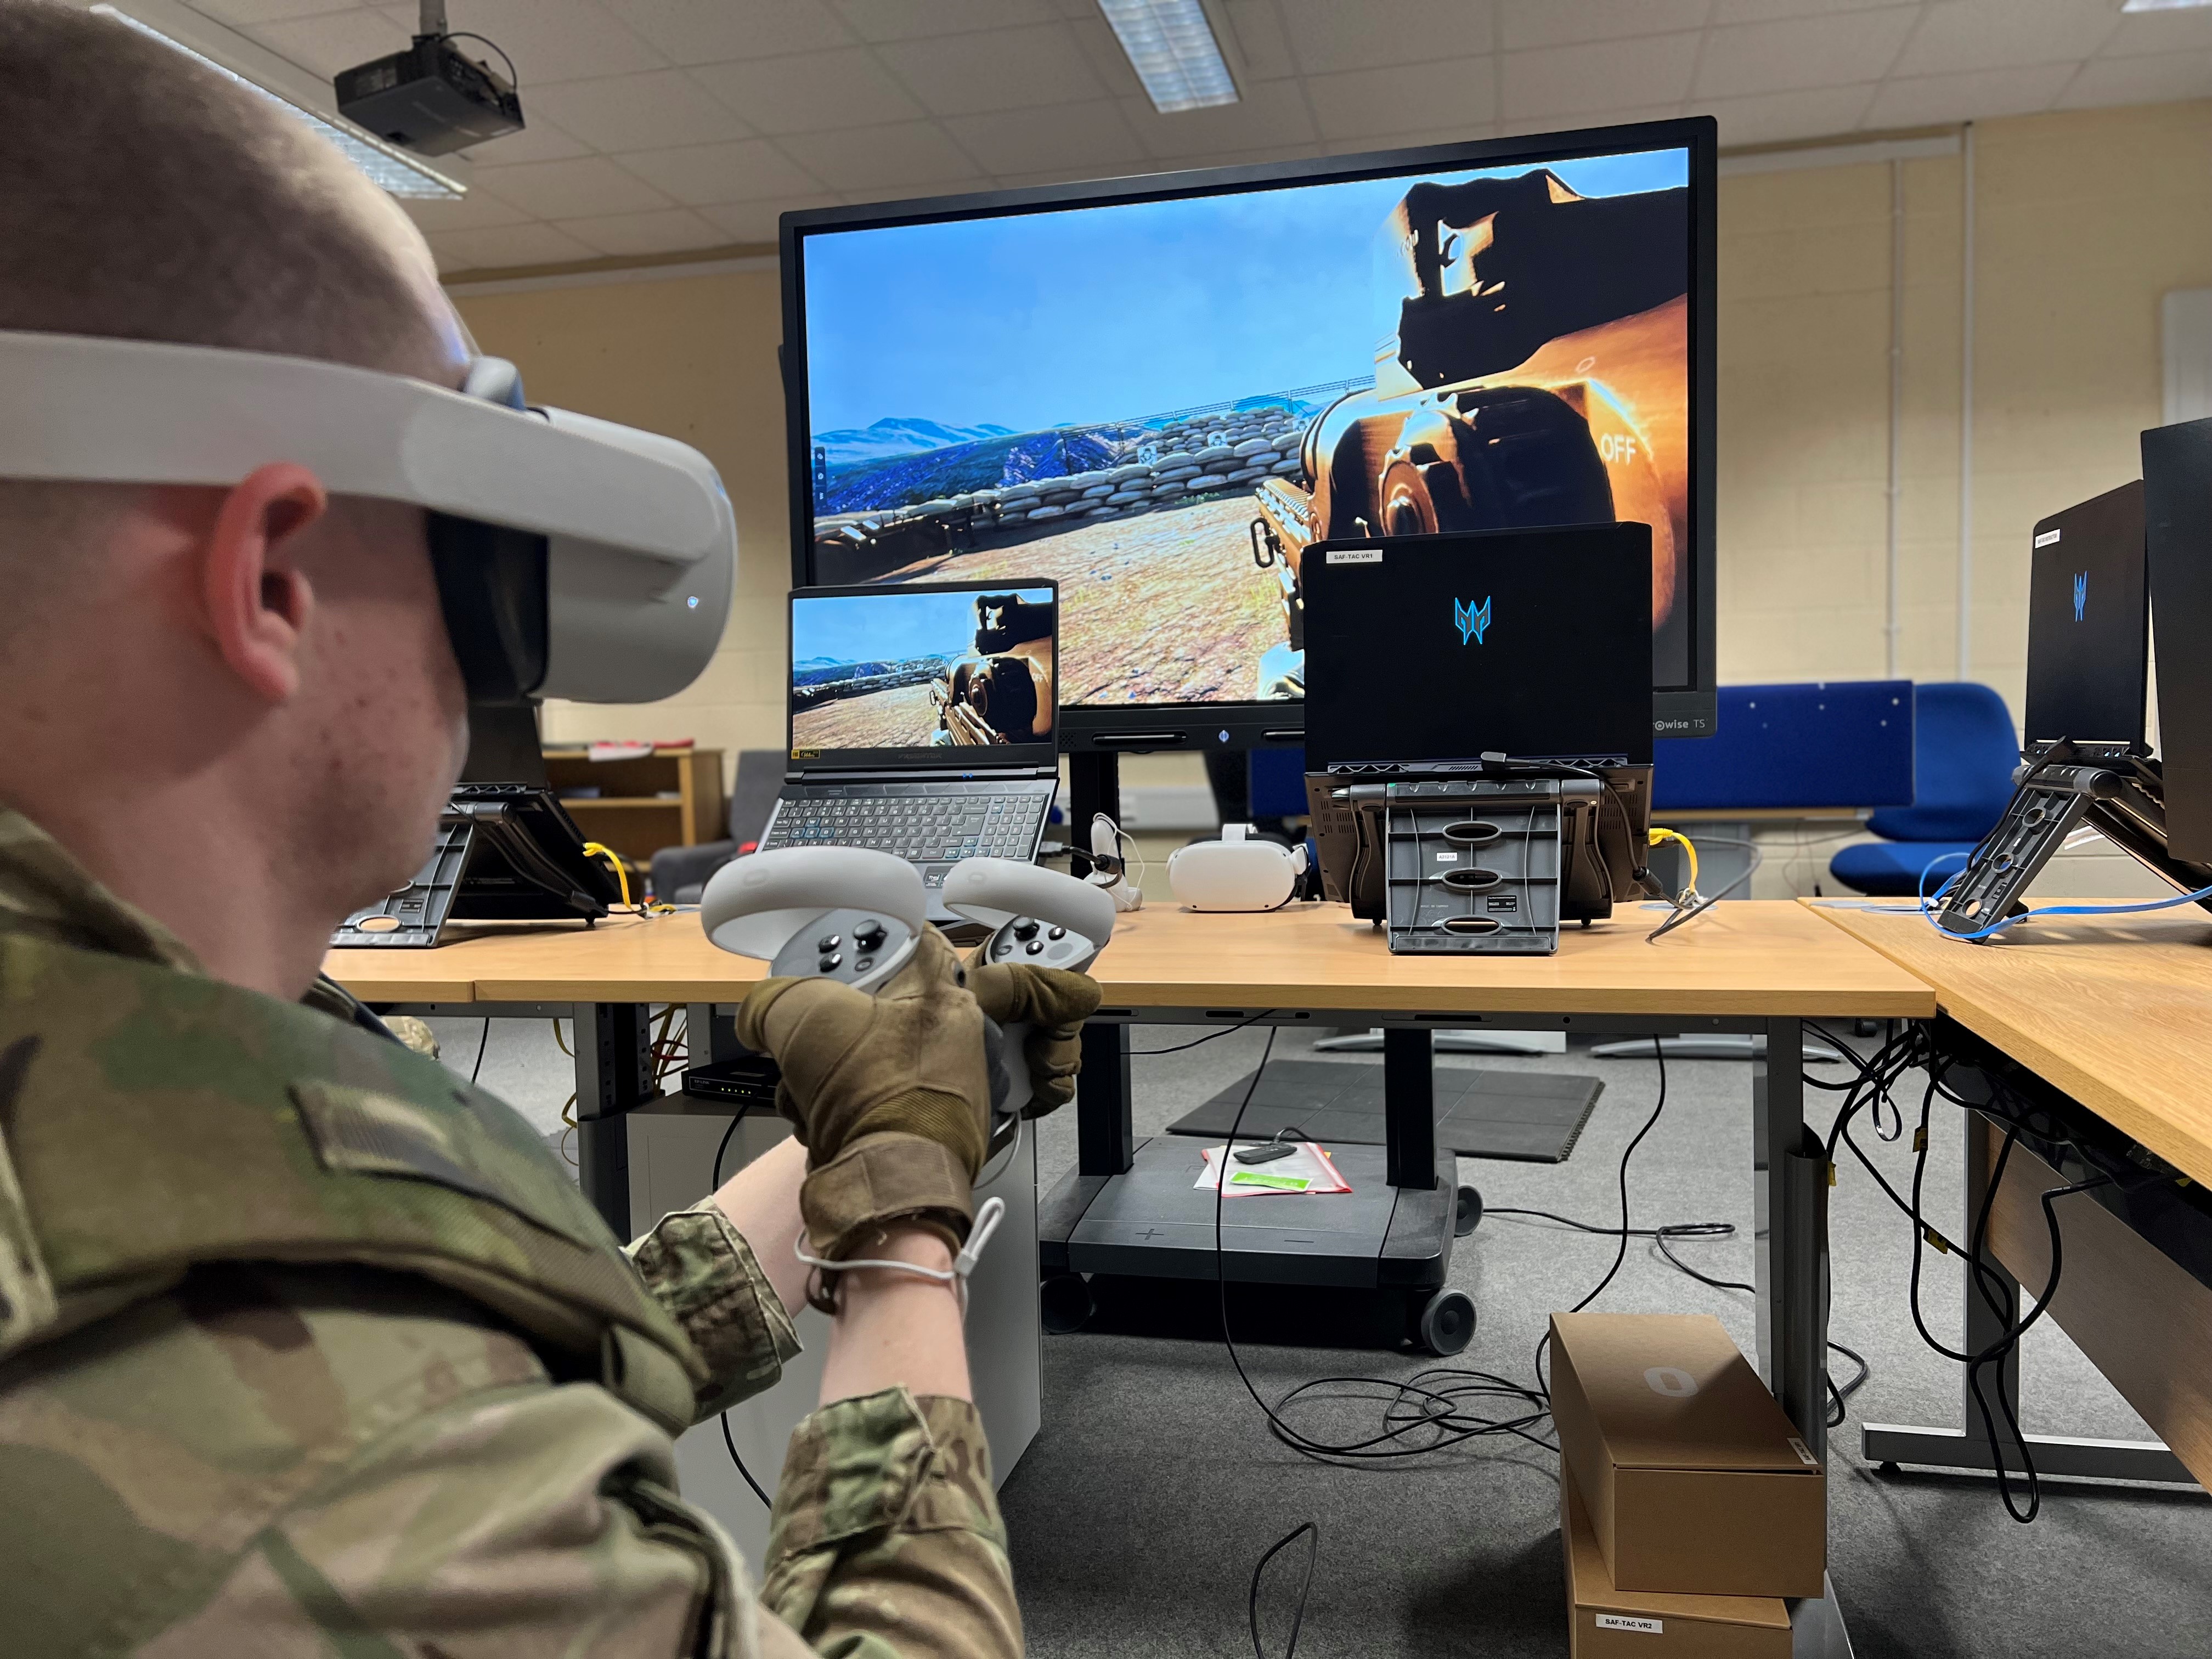 Personnel wear Virtual Reality headsets and use equipment. Computers and desks in background.